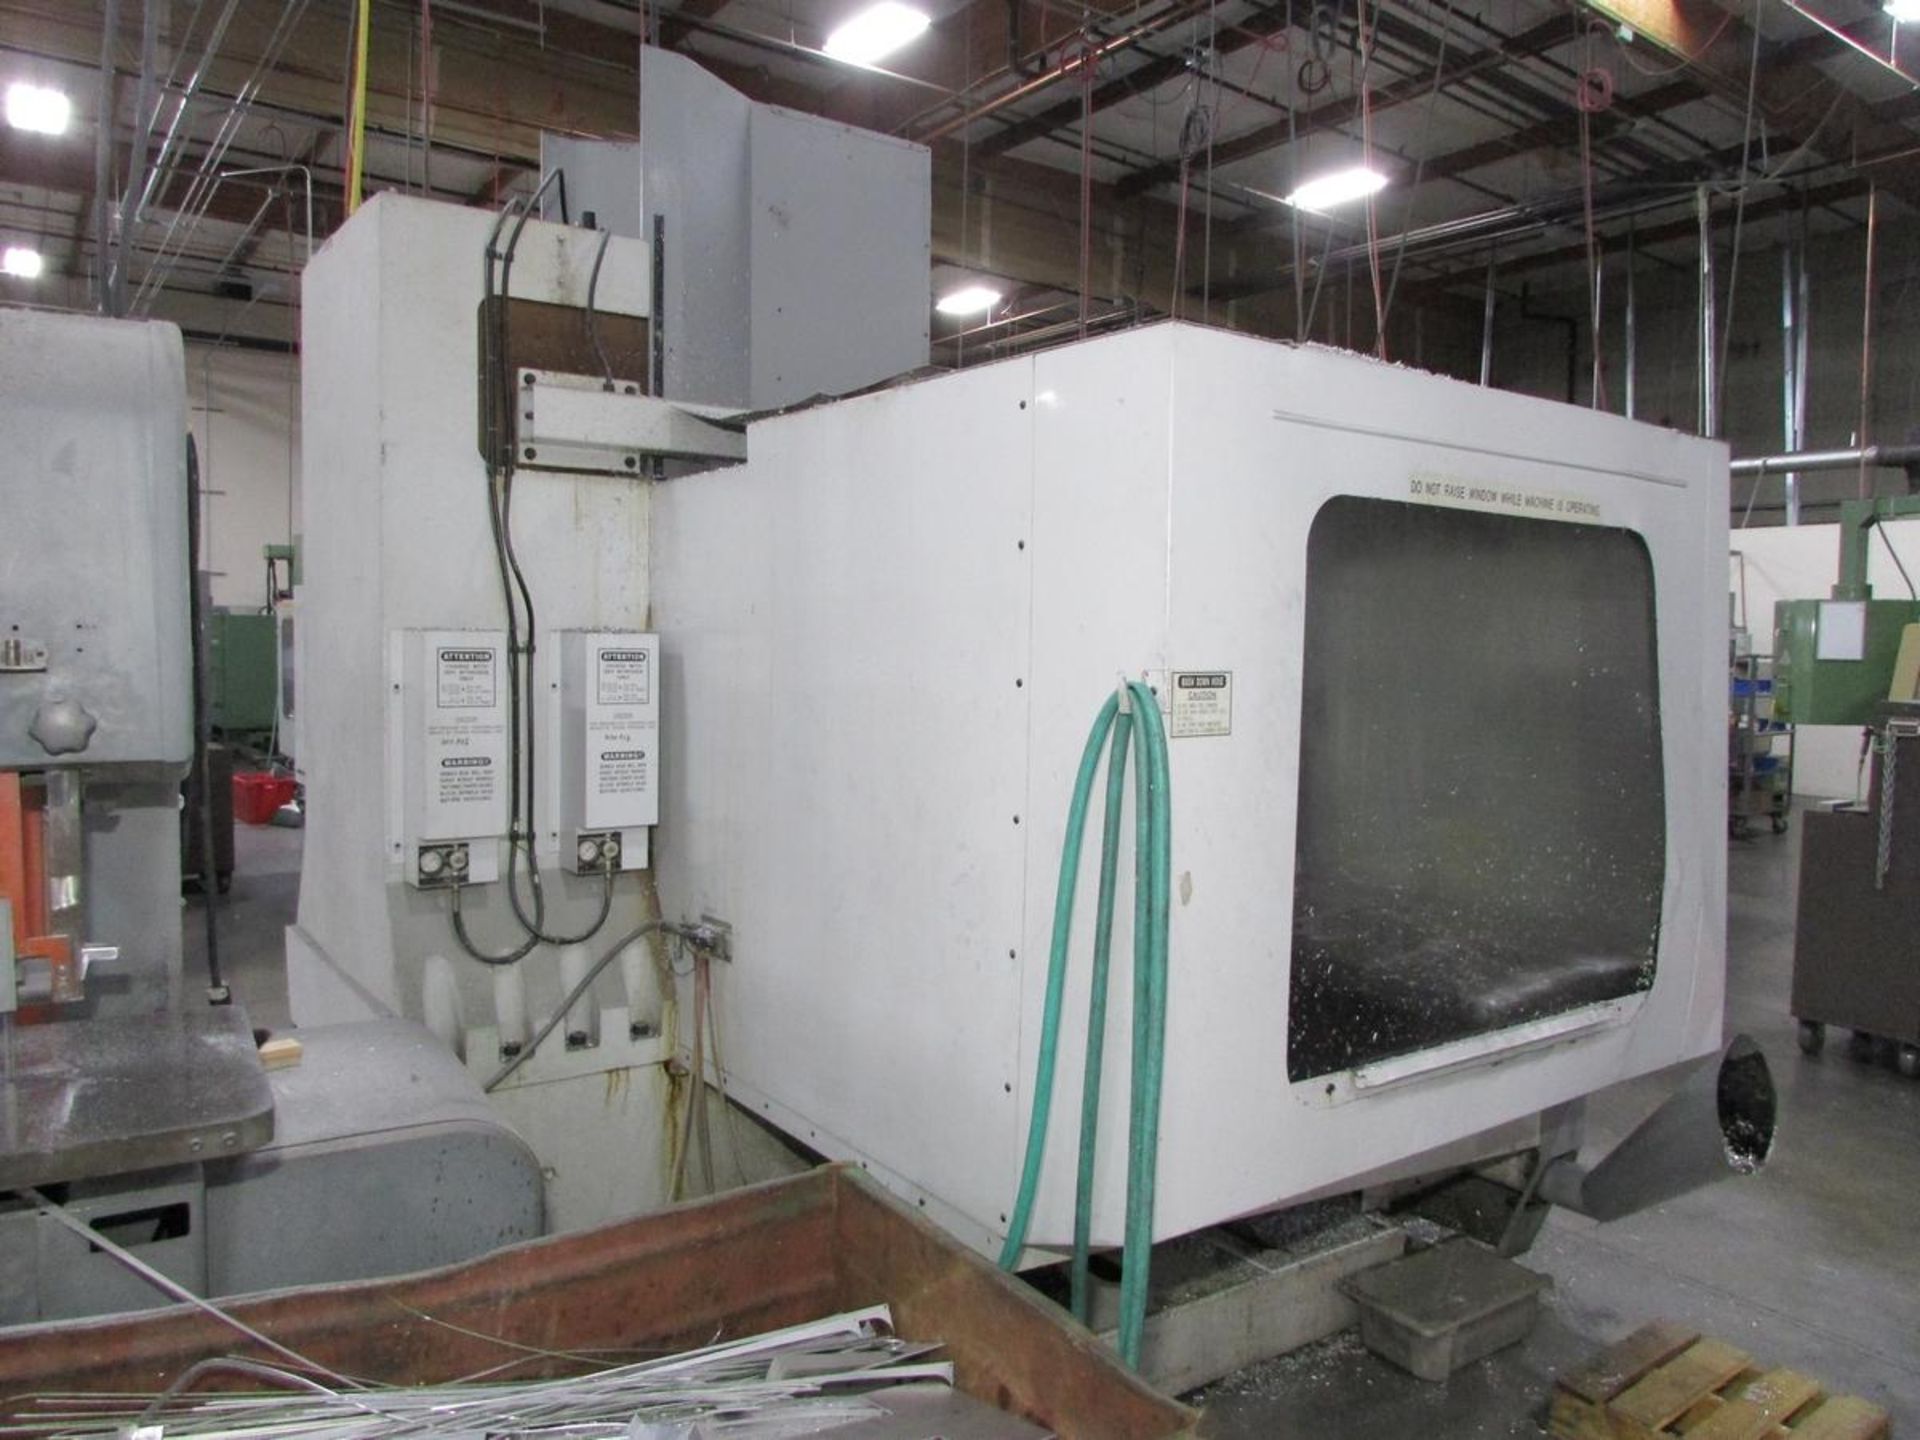 1997 Haas VF-7 4-Axis CNC Vertical Maching Center - Image 22 of 30